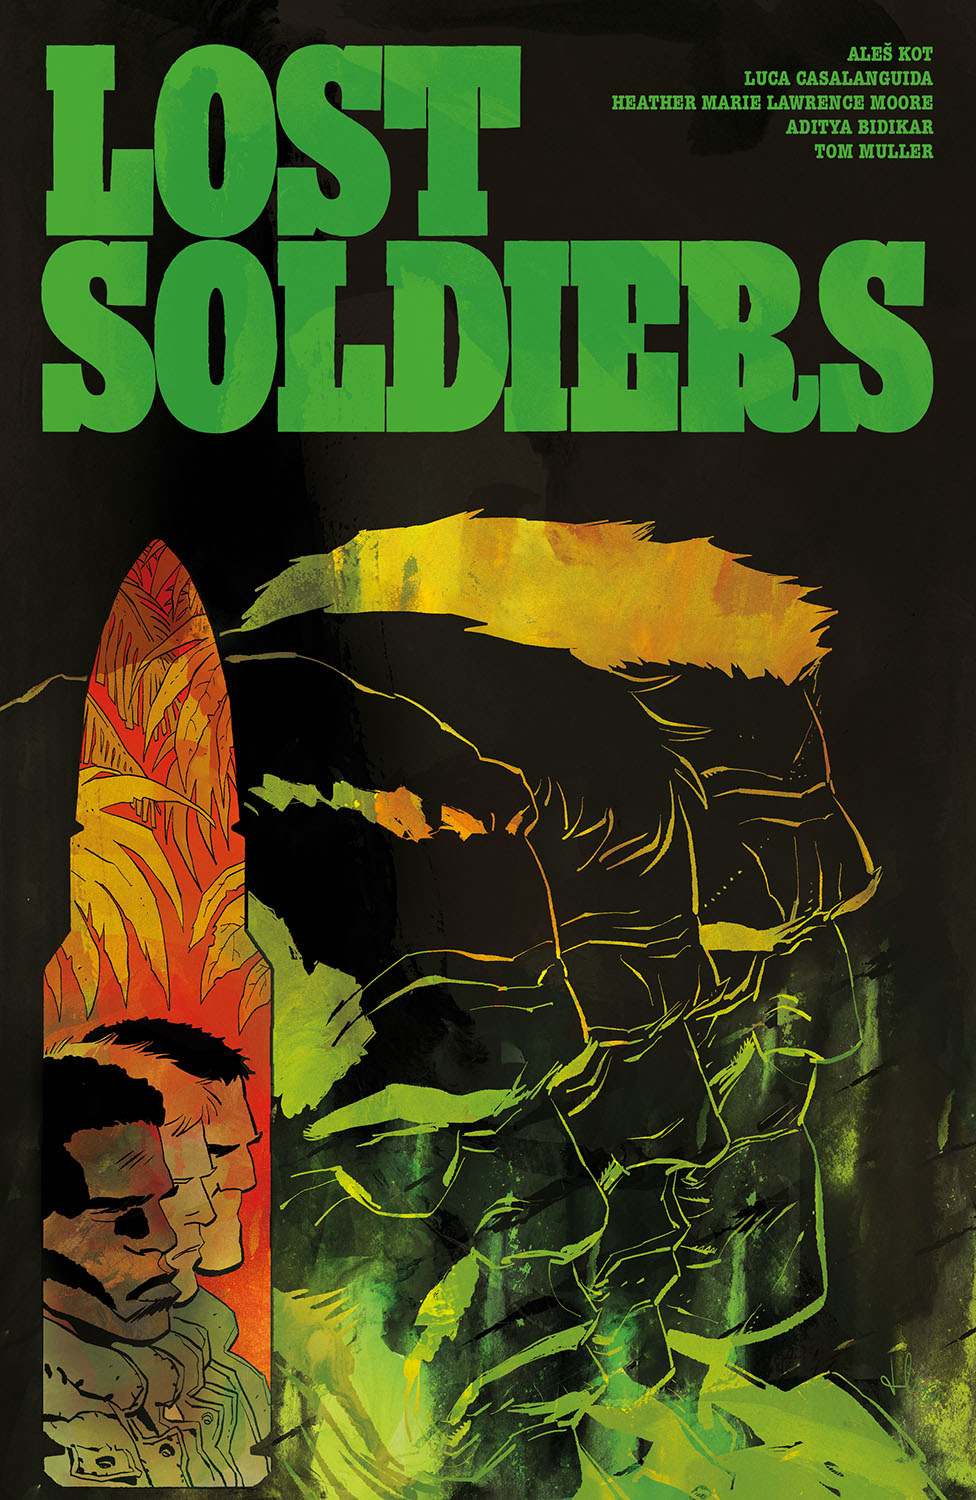 Lost Soldiers Graphic Novel